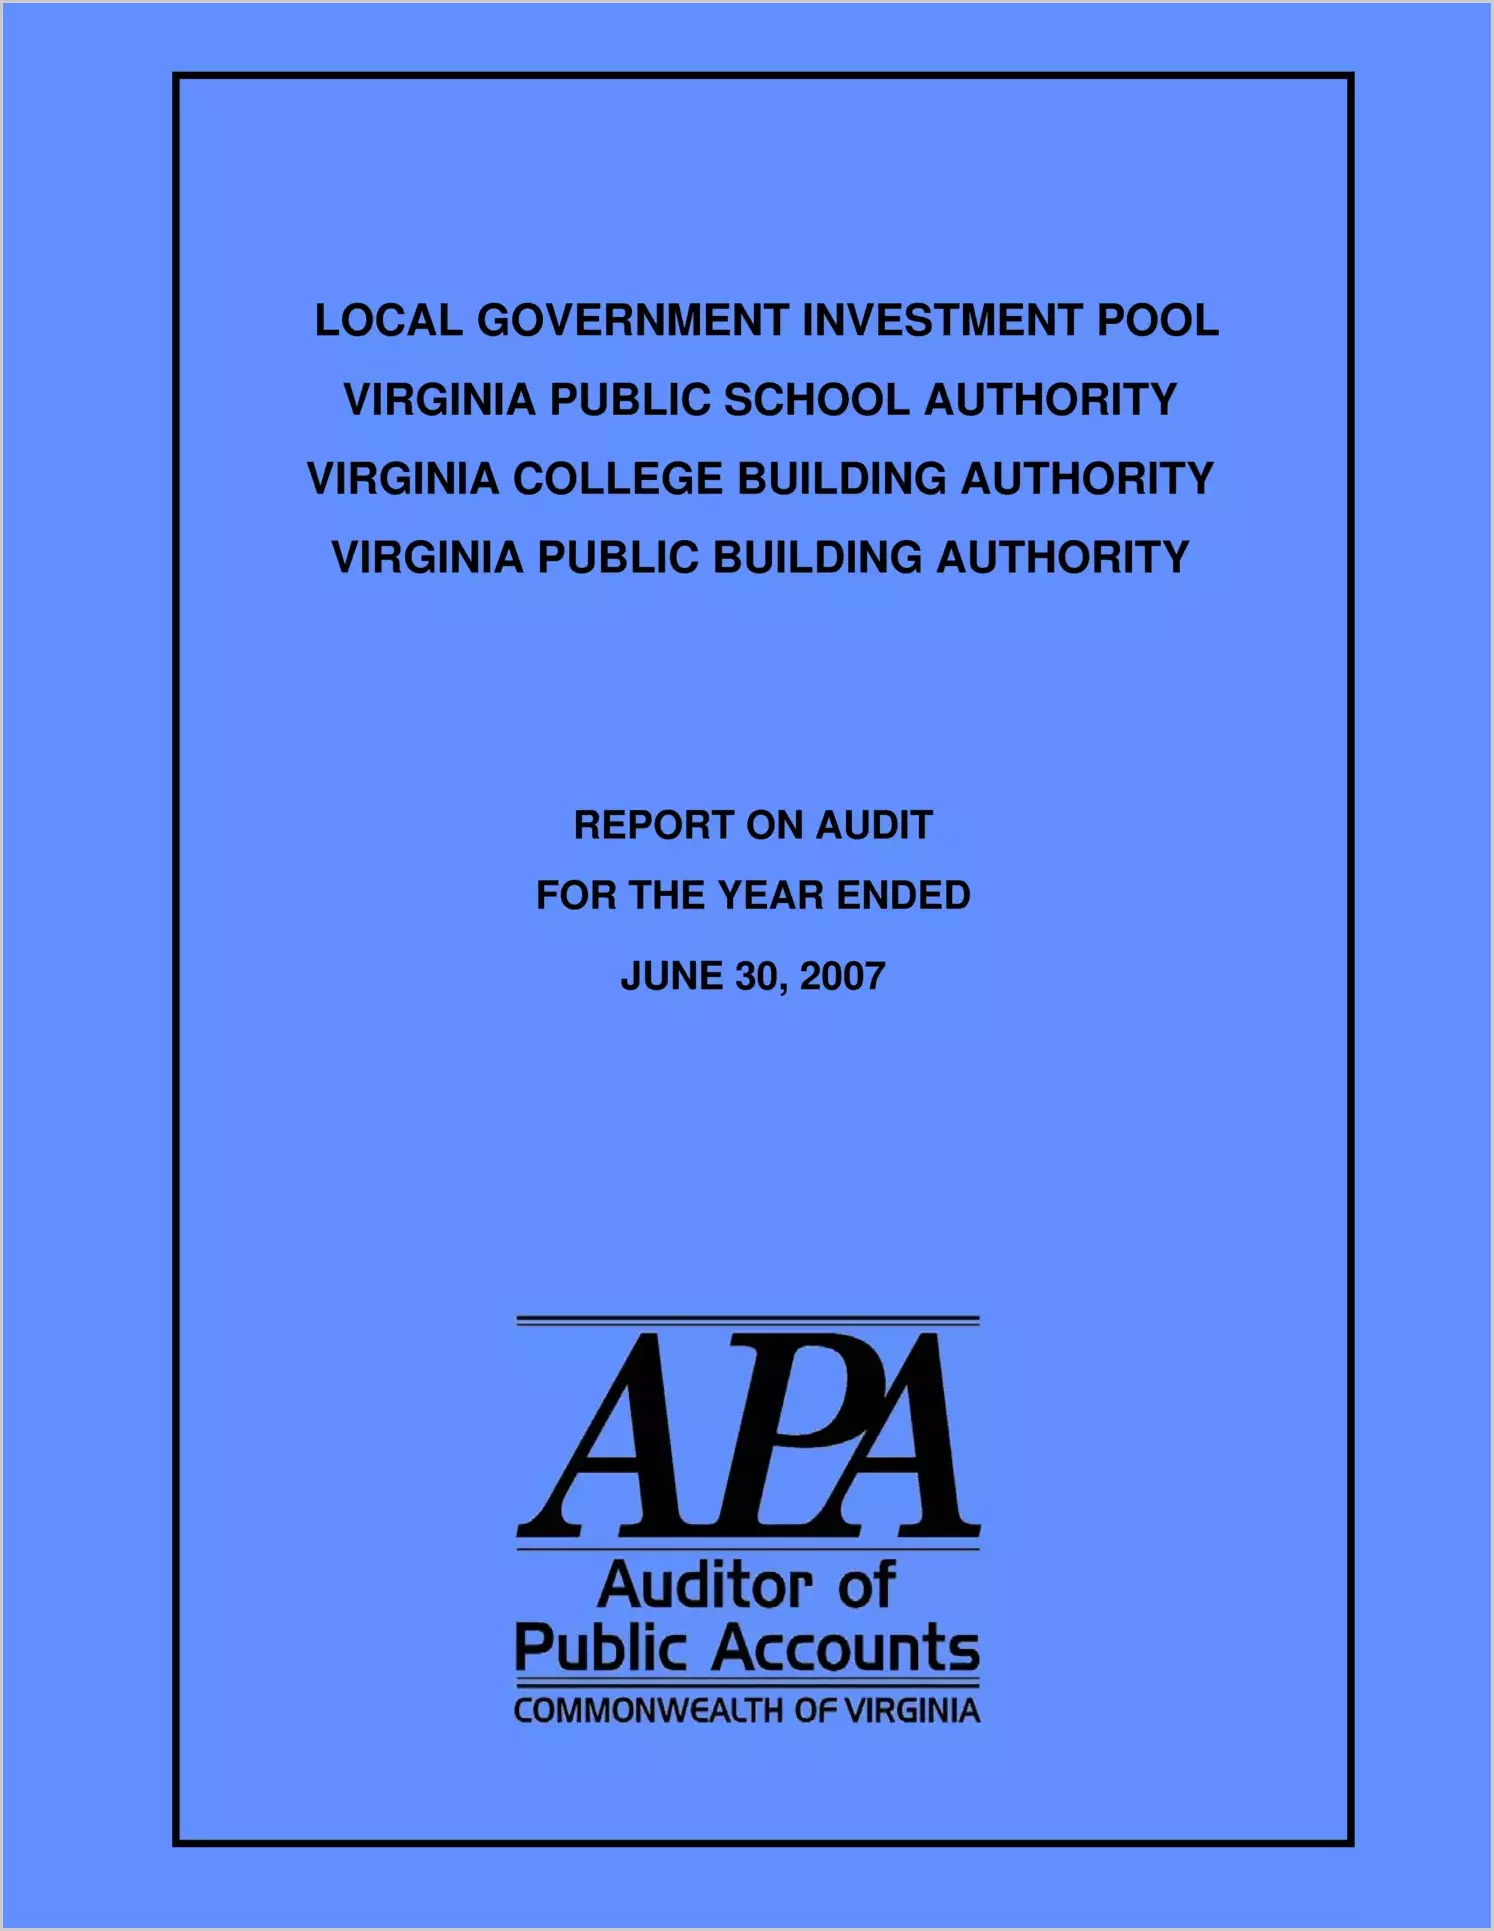 Local Government Investment Pool, Virginia Public School Authority, Virginia College Building Authority, Virginia Public Building Authority Report on Audit for Period Ended June 30, 2007